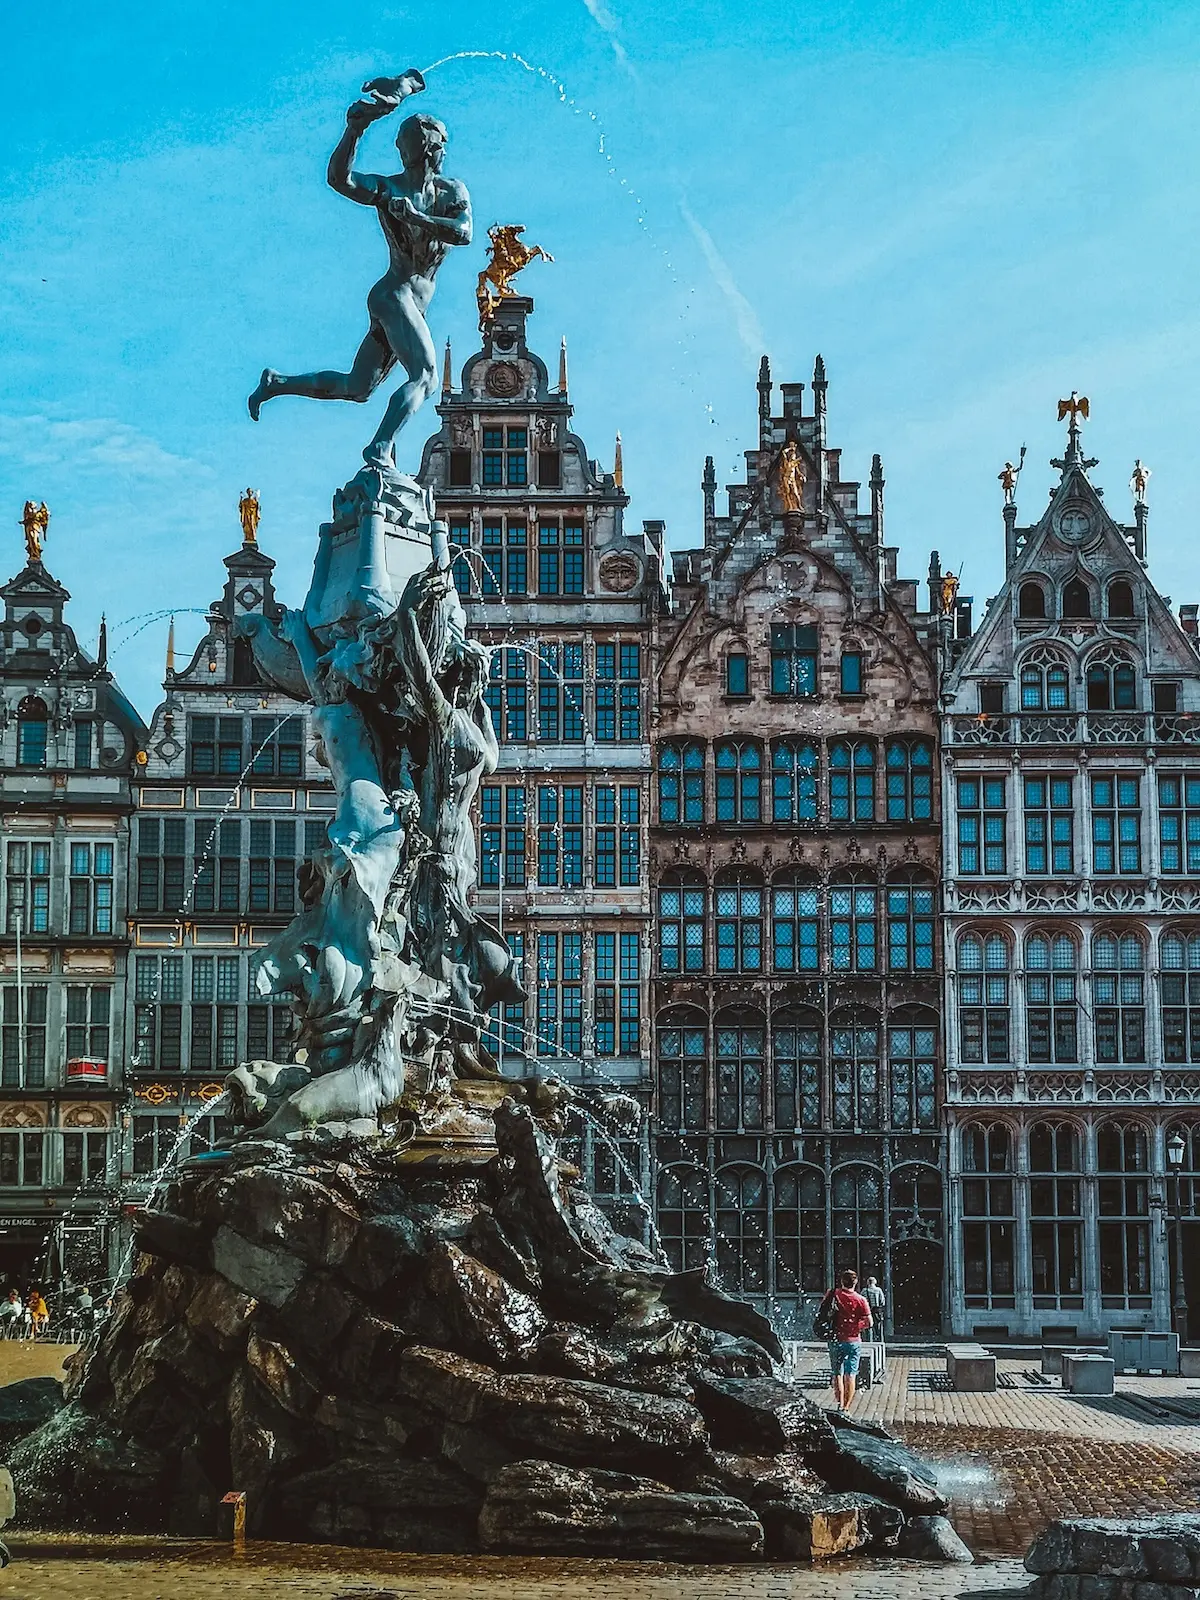 Discover the magnificent Antwerp's Town Hall: guided tour in English